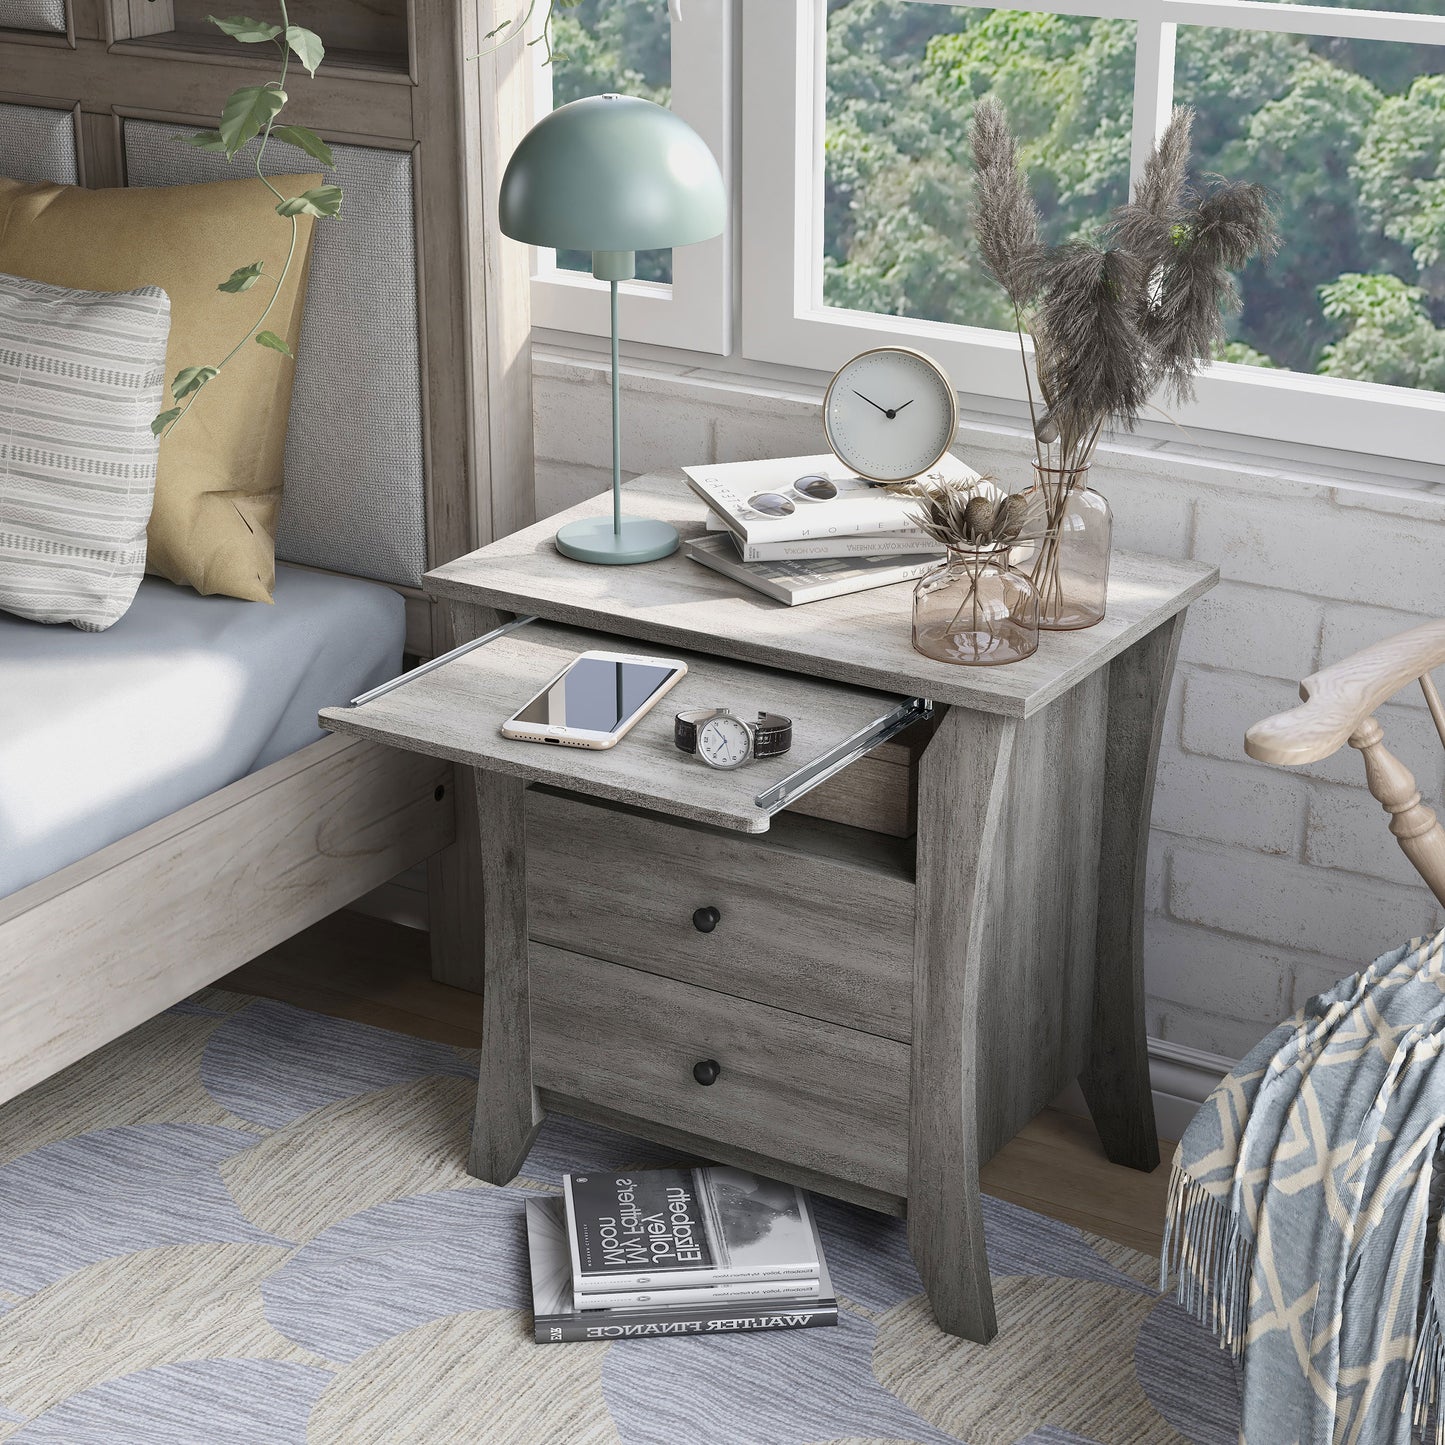 Left angled transitional vintage gray oak two-drawer one-shelf nightstand with tray extended in a bedroom with accessories